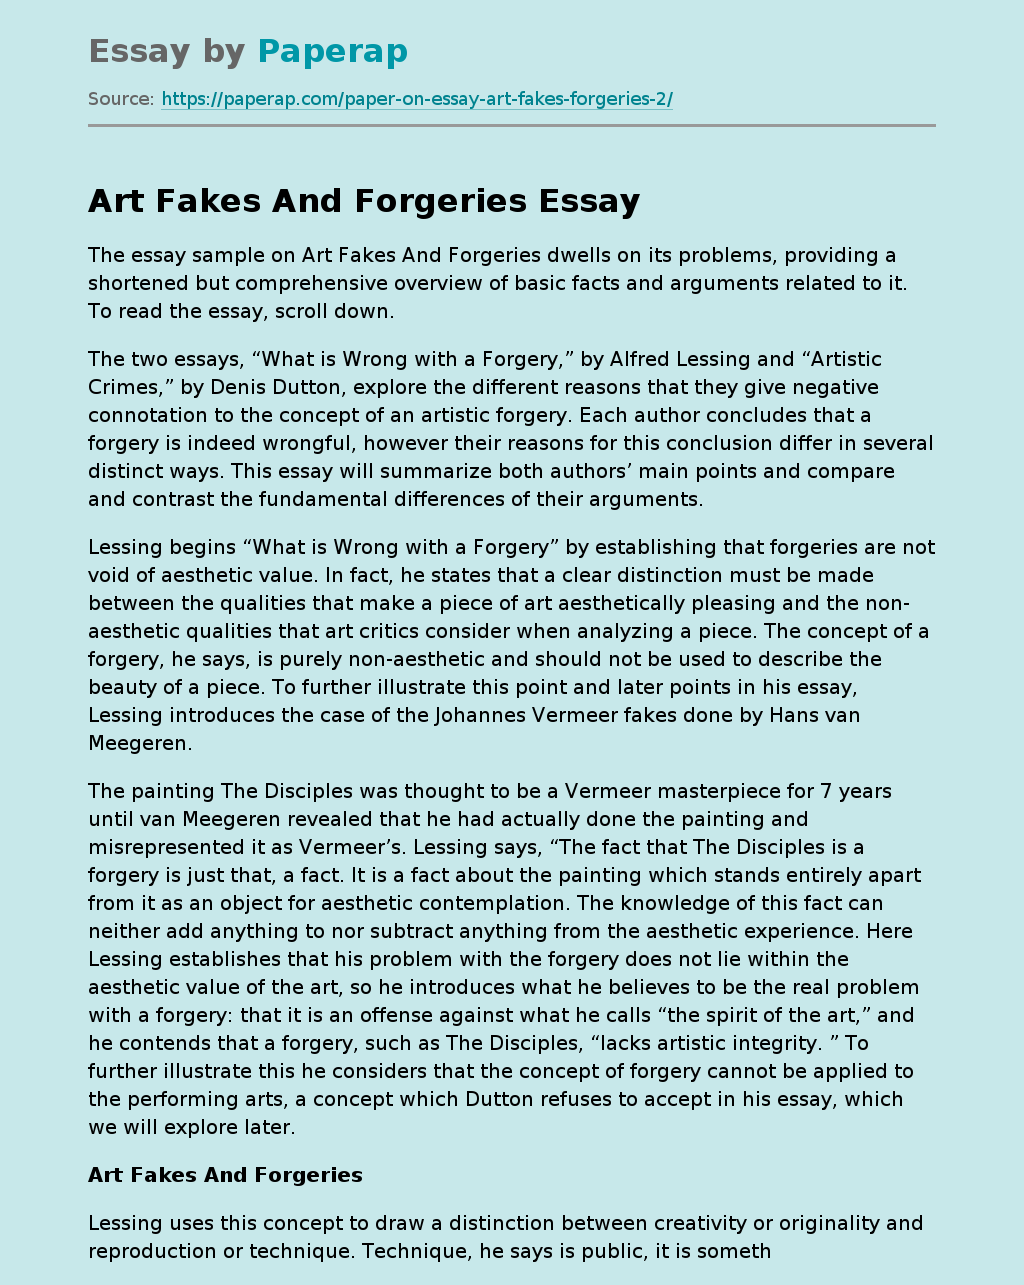 Art Fakes And Forgeries